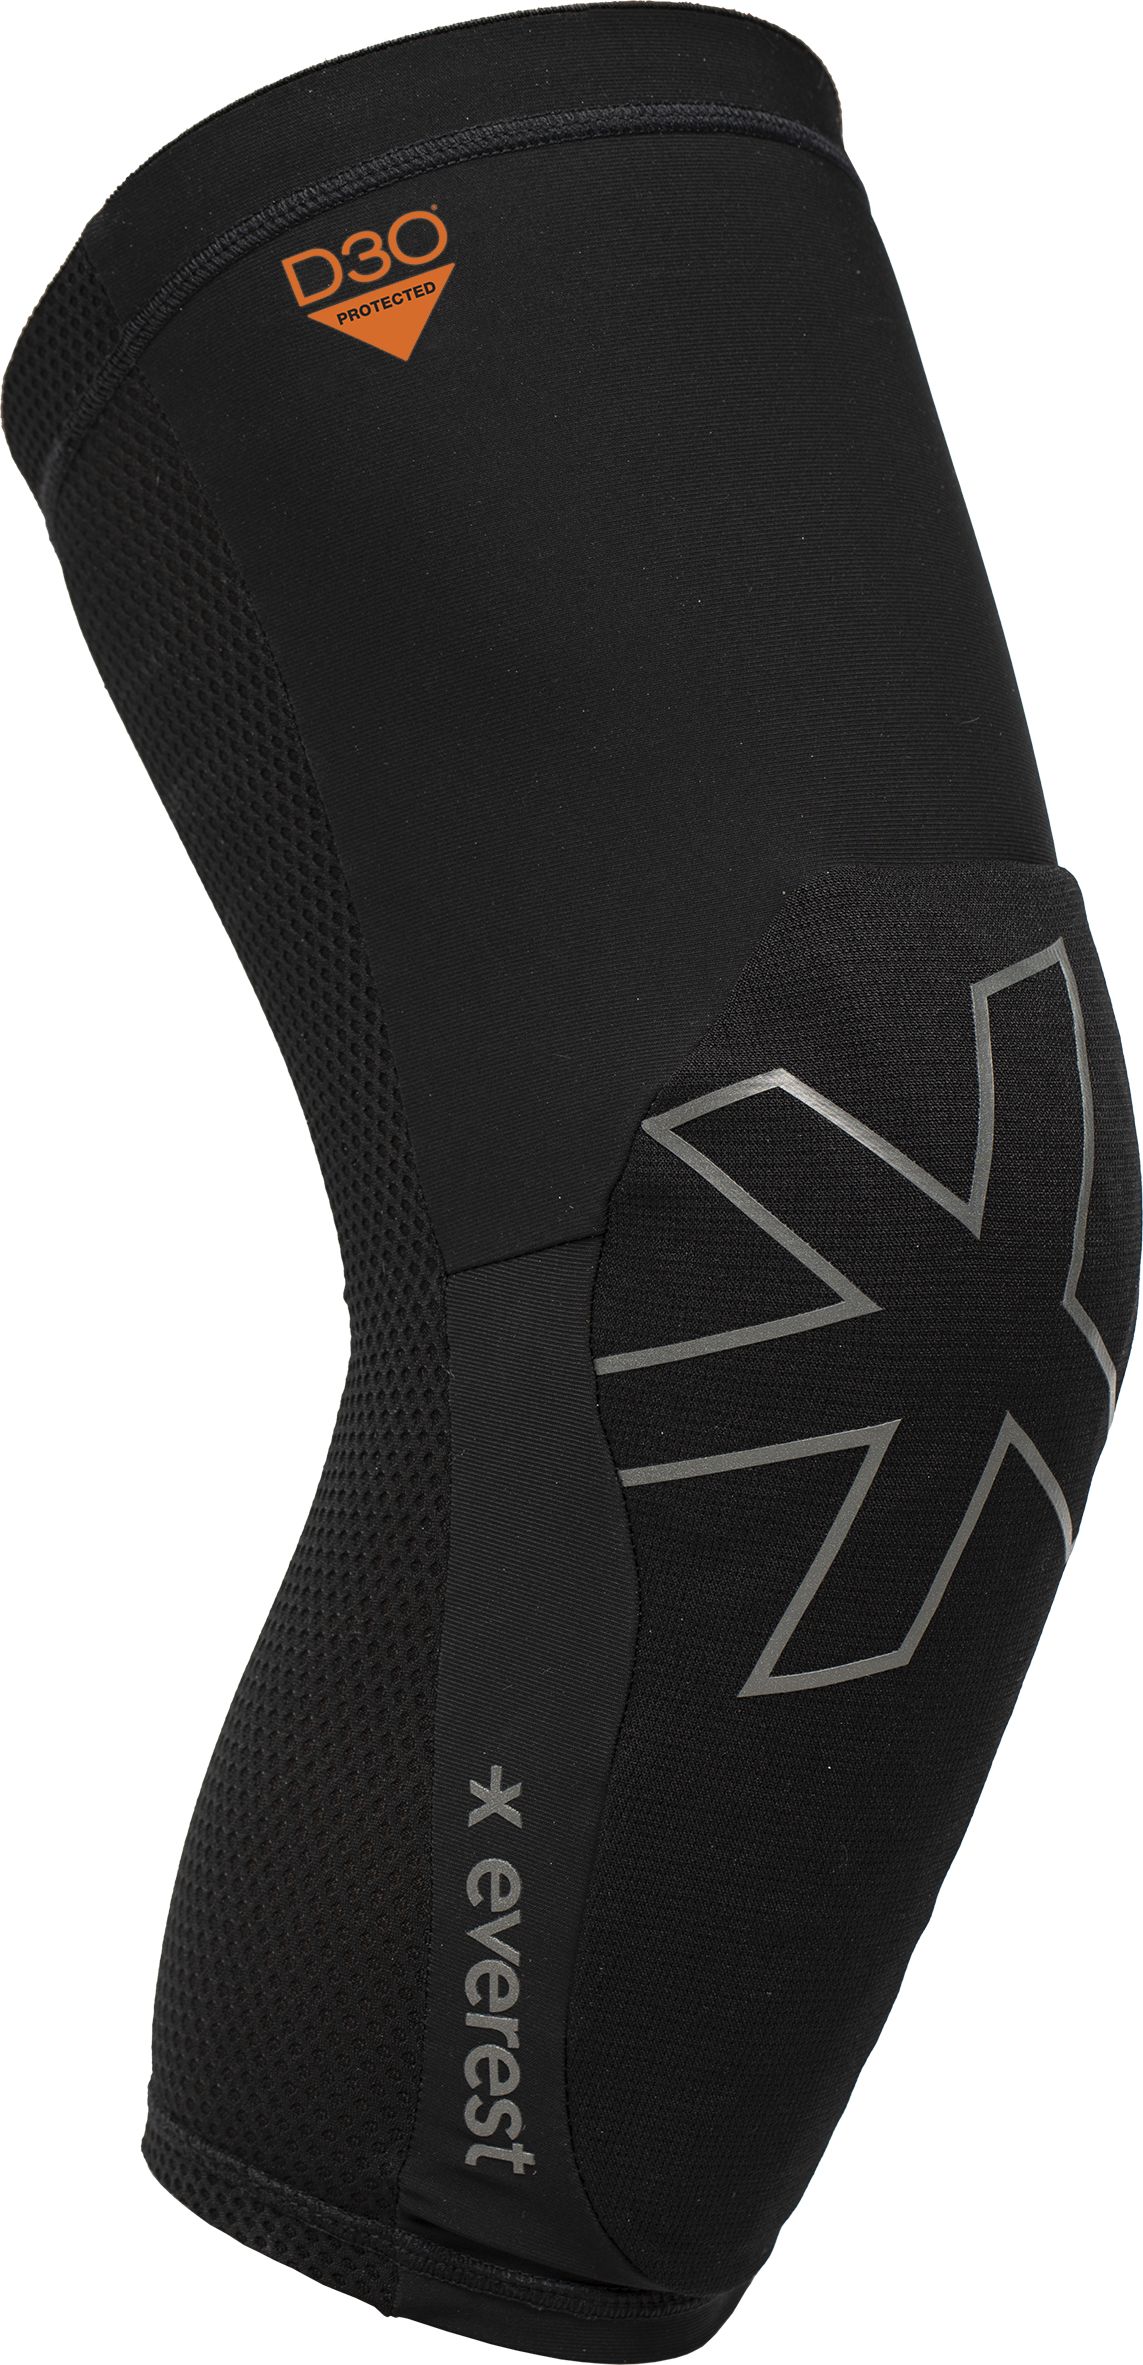 EVEREST, D3O KNEE GUARDS COMPACT